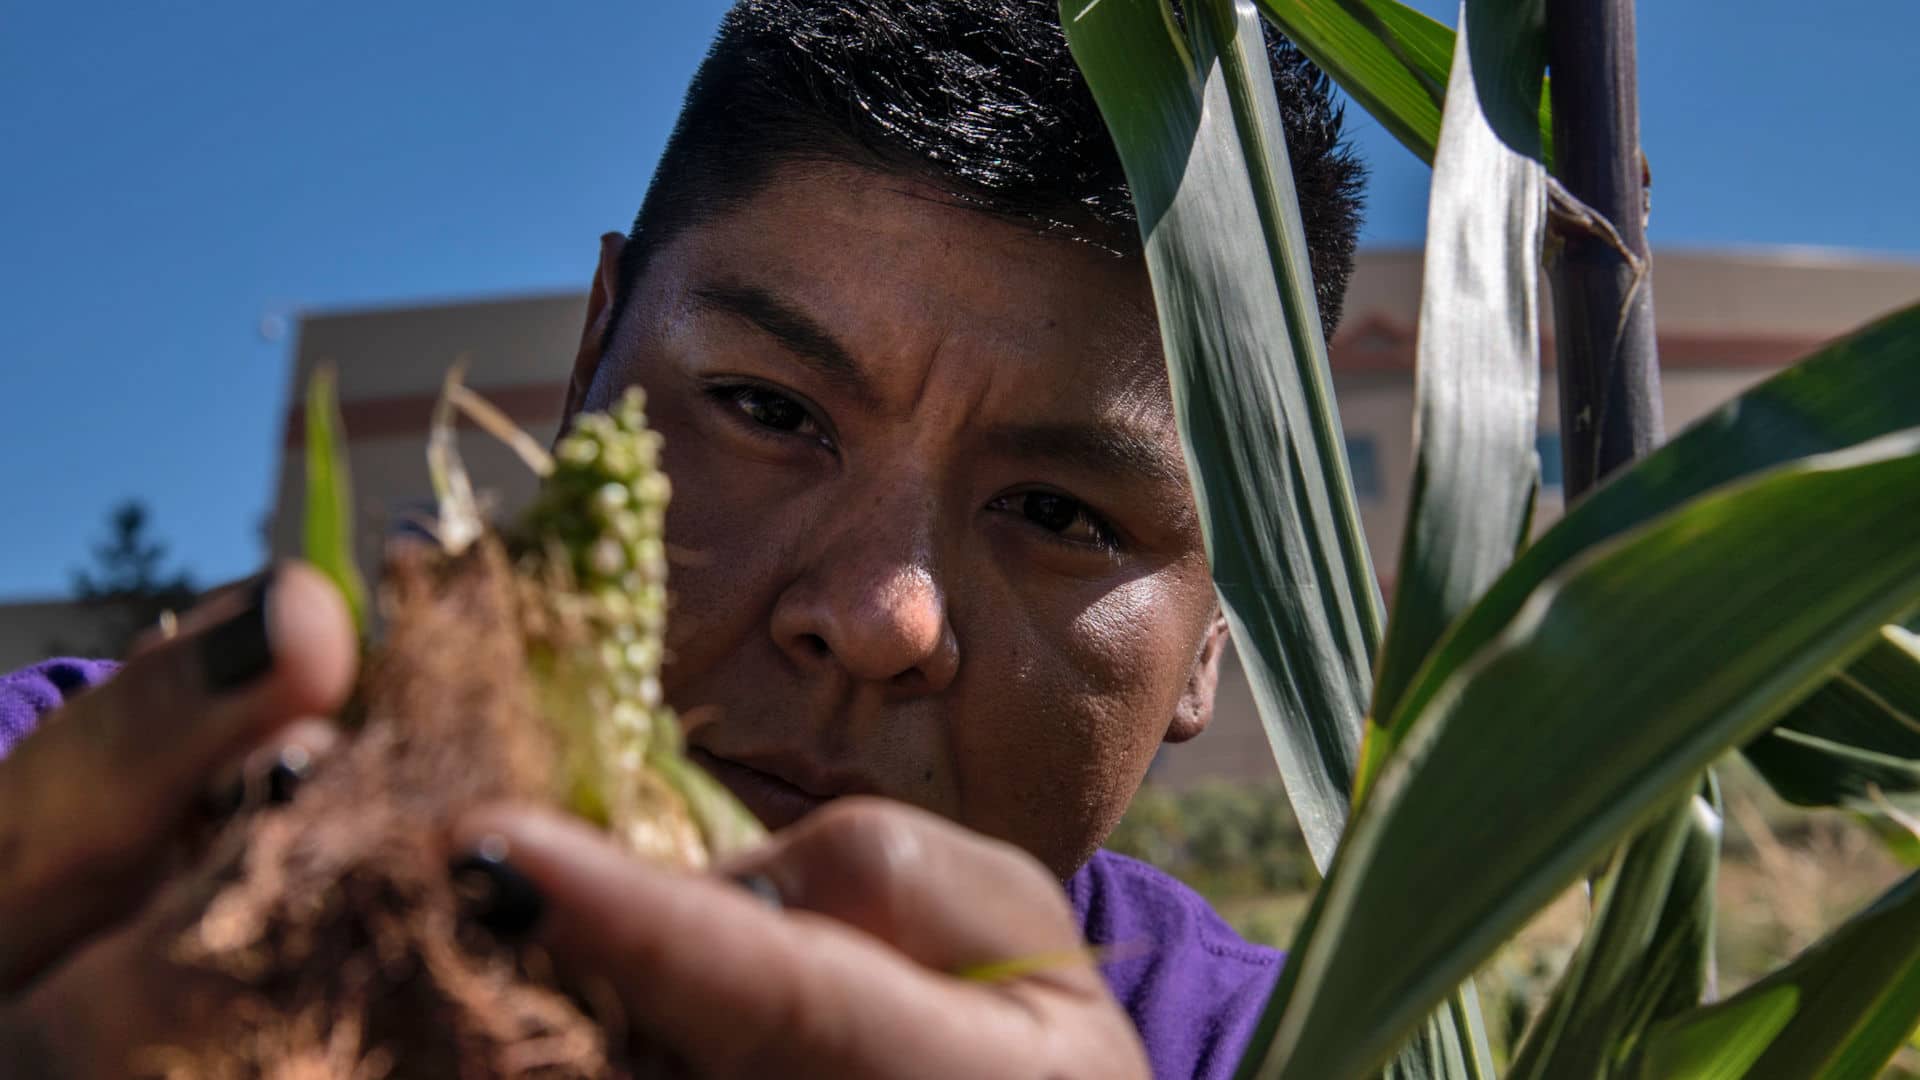 Research Assistant Kyle Kootswaytewa checks on the health of native corn crops in the Institute of American Indian Arts Demonstration Garden. The garden demonstrates and promotes indigenous agricultural methods for food and medical crop cultivation.